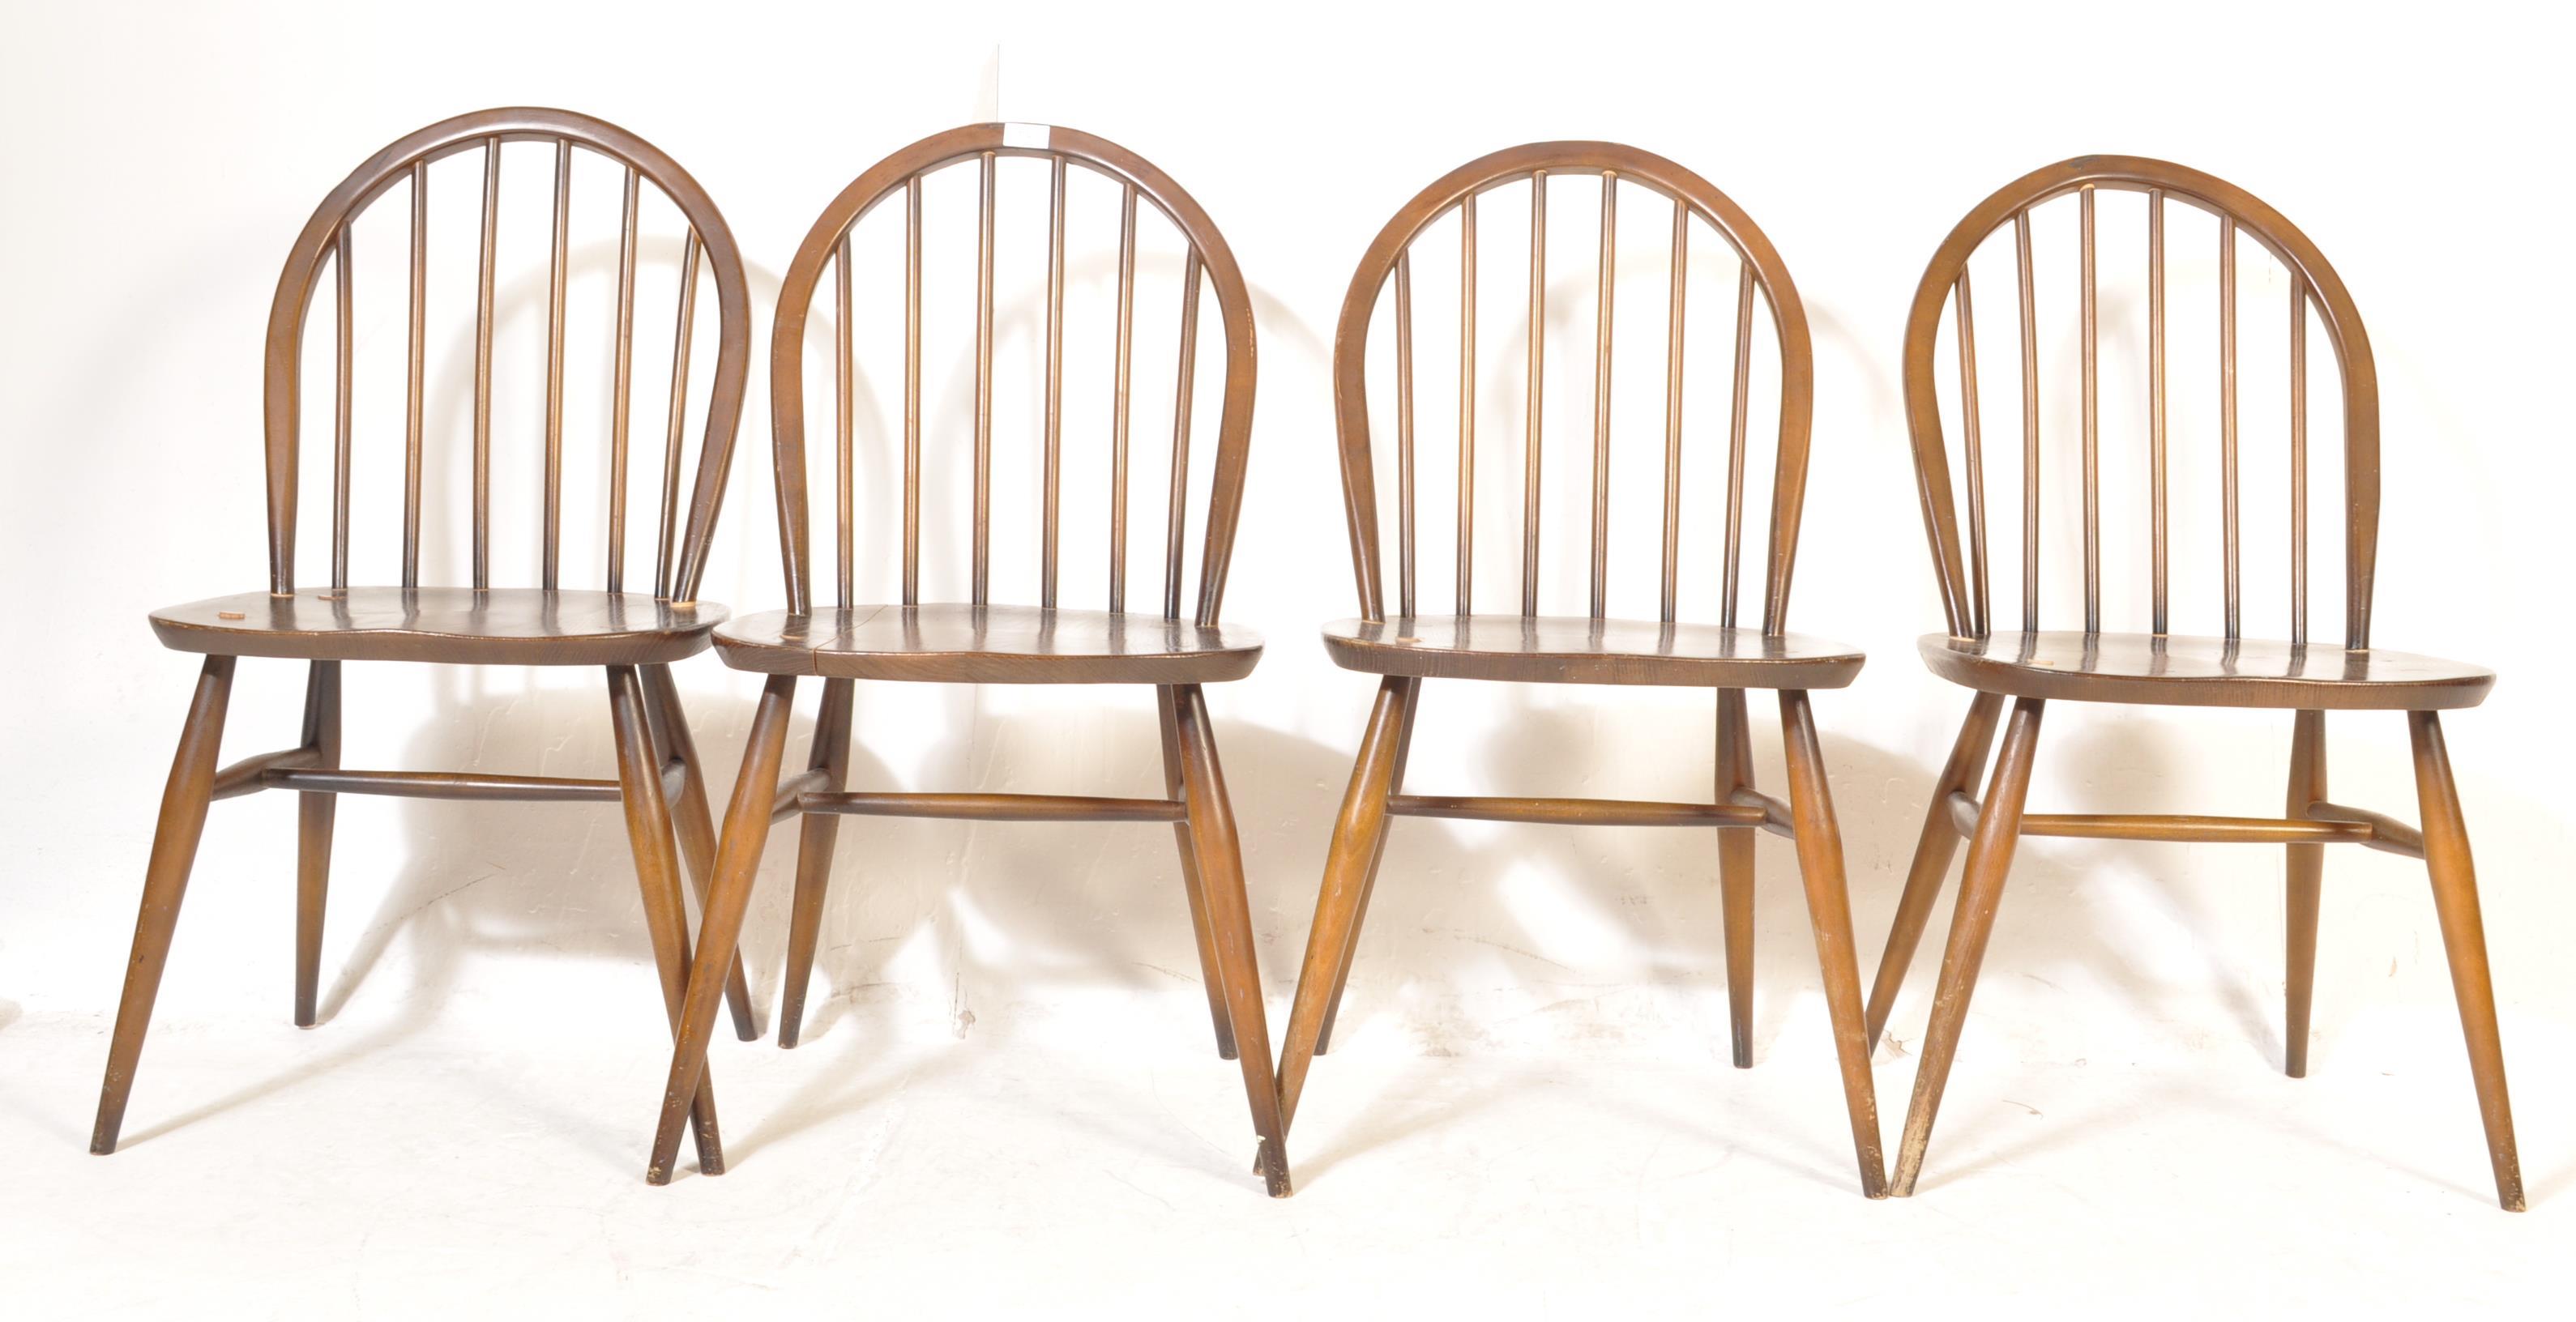 ERCOL - LUCIAN ERCOLANI - SET OF FOUR WINDSOR DINING CHAIRS - Image 2 of 6